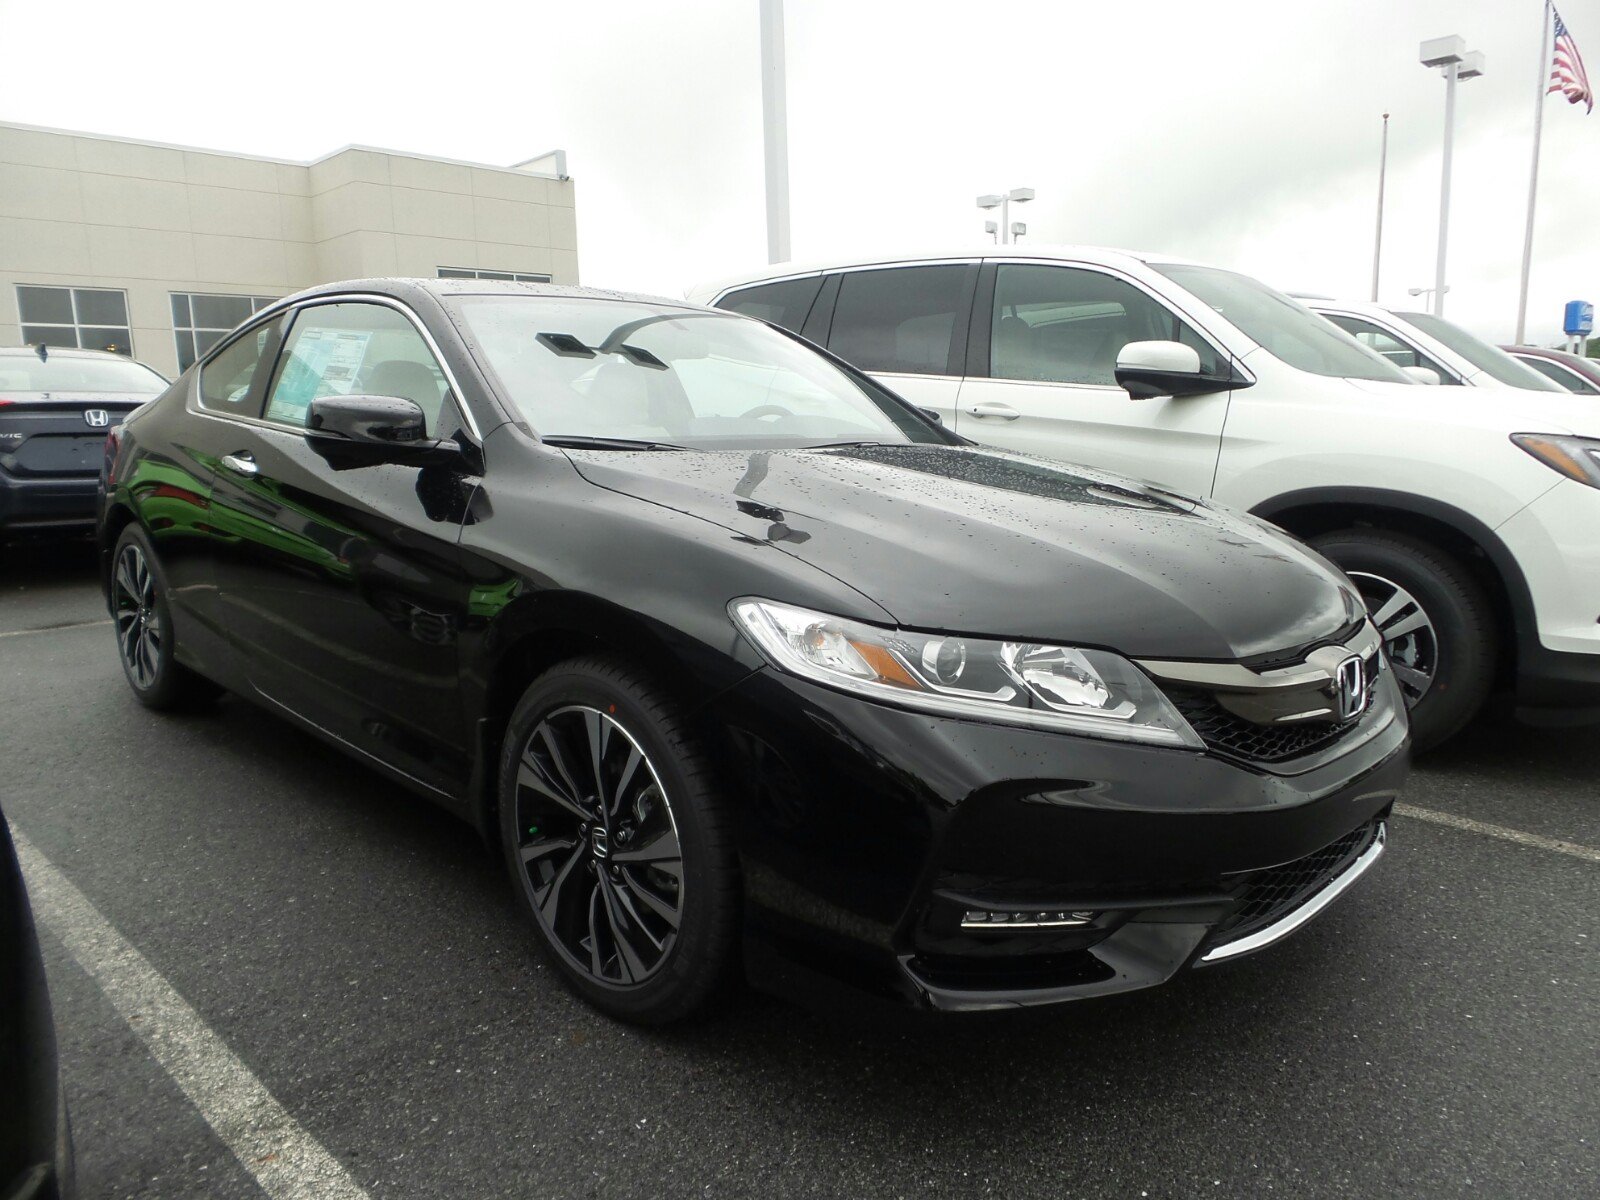 New 2017 Honda Accord Coupe EX-L V6 2dr Car in Indiana, PA #57387